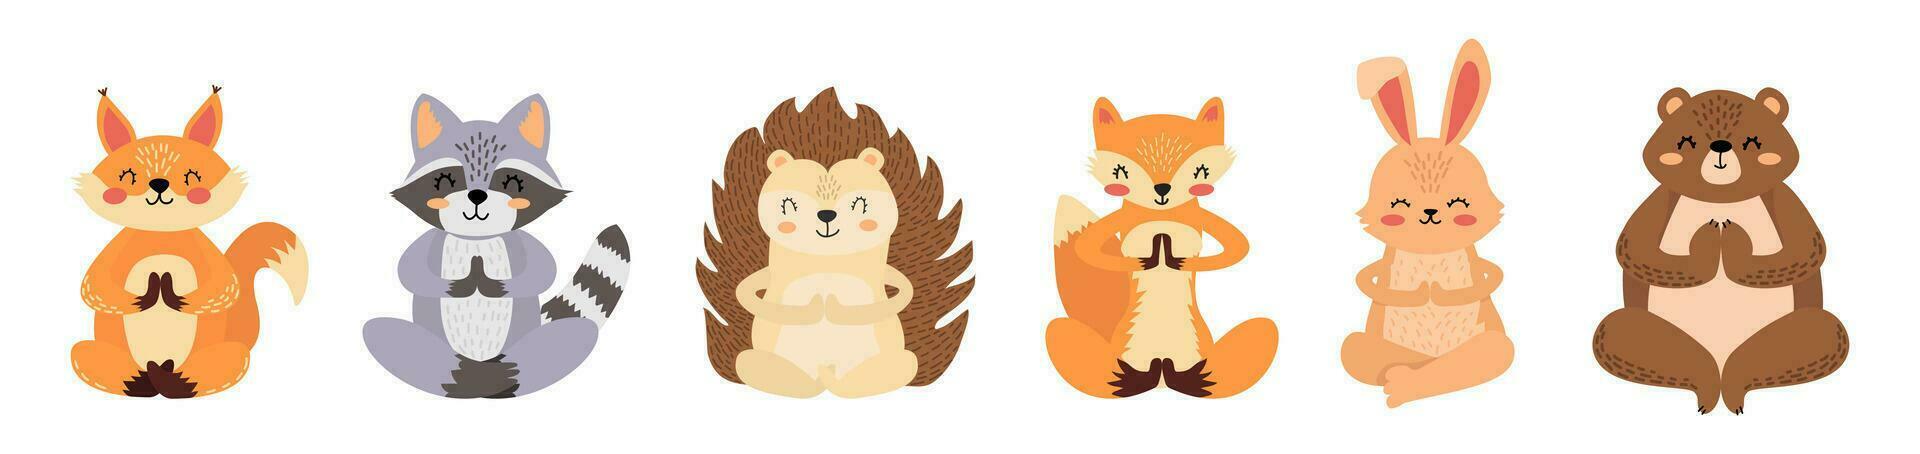 Vector set of animals doing yoga. Forest animals meditating. Collection of charming animals in lotus pose. Fox, squirrel, raccoon, hedgehog, bear. Cartoon style. White isolated background.